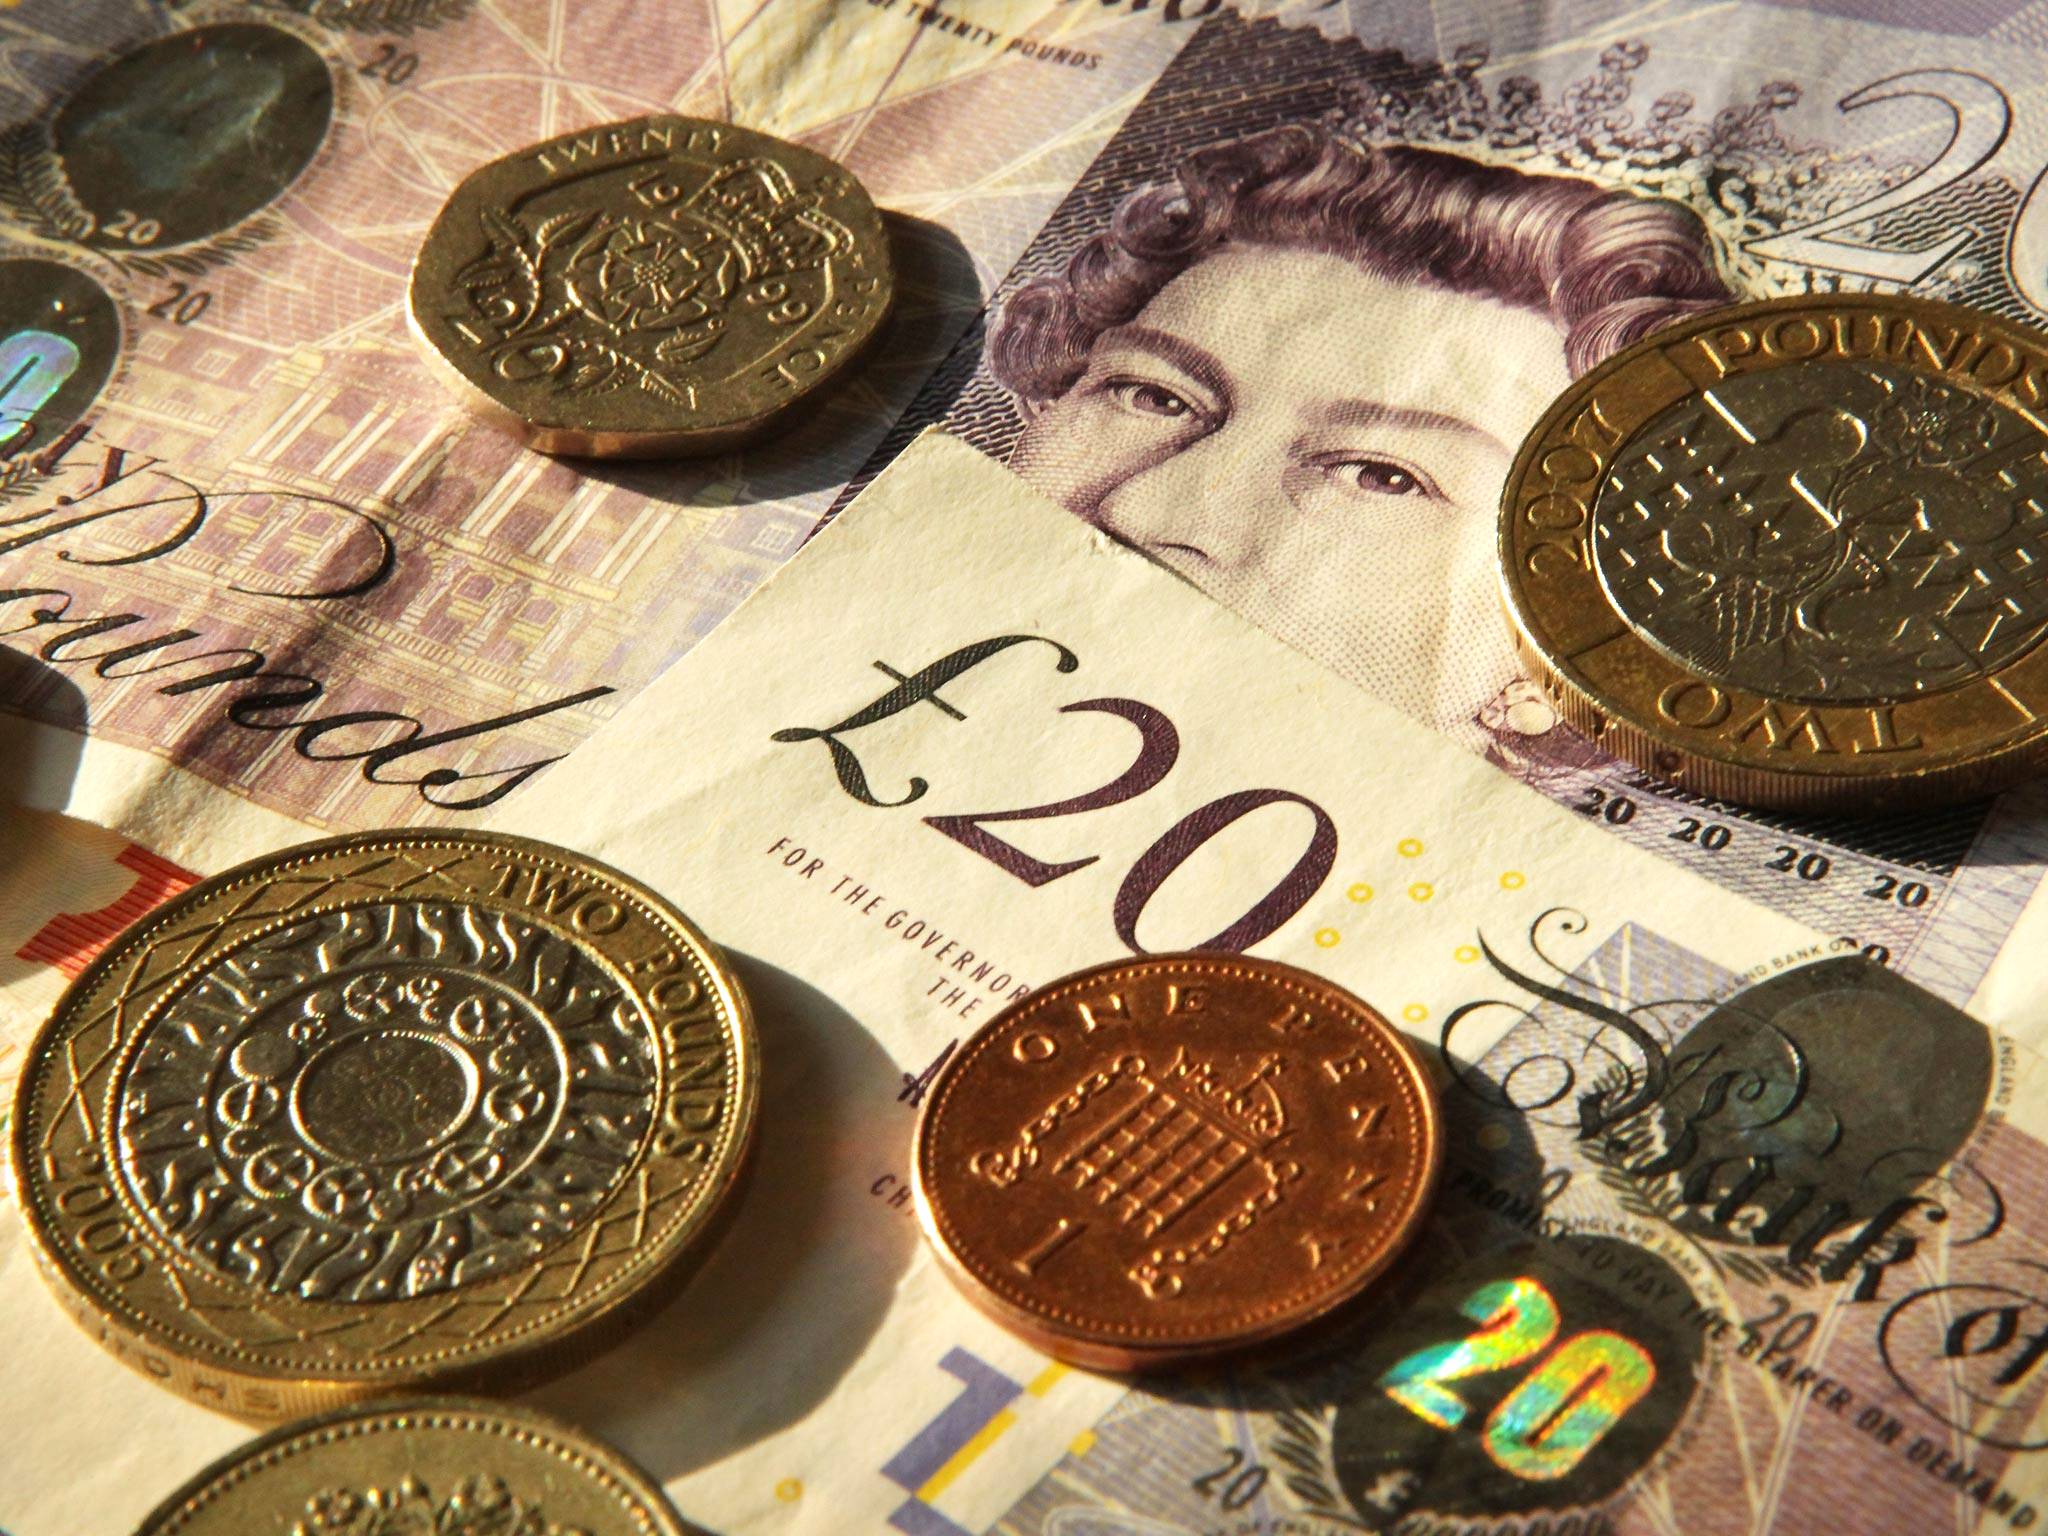 The Low Pay Commission called for an overhaul of the national minimum wage